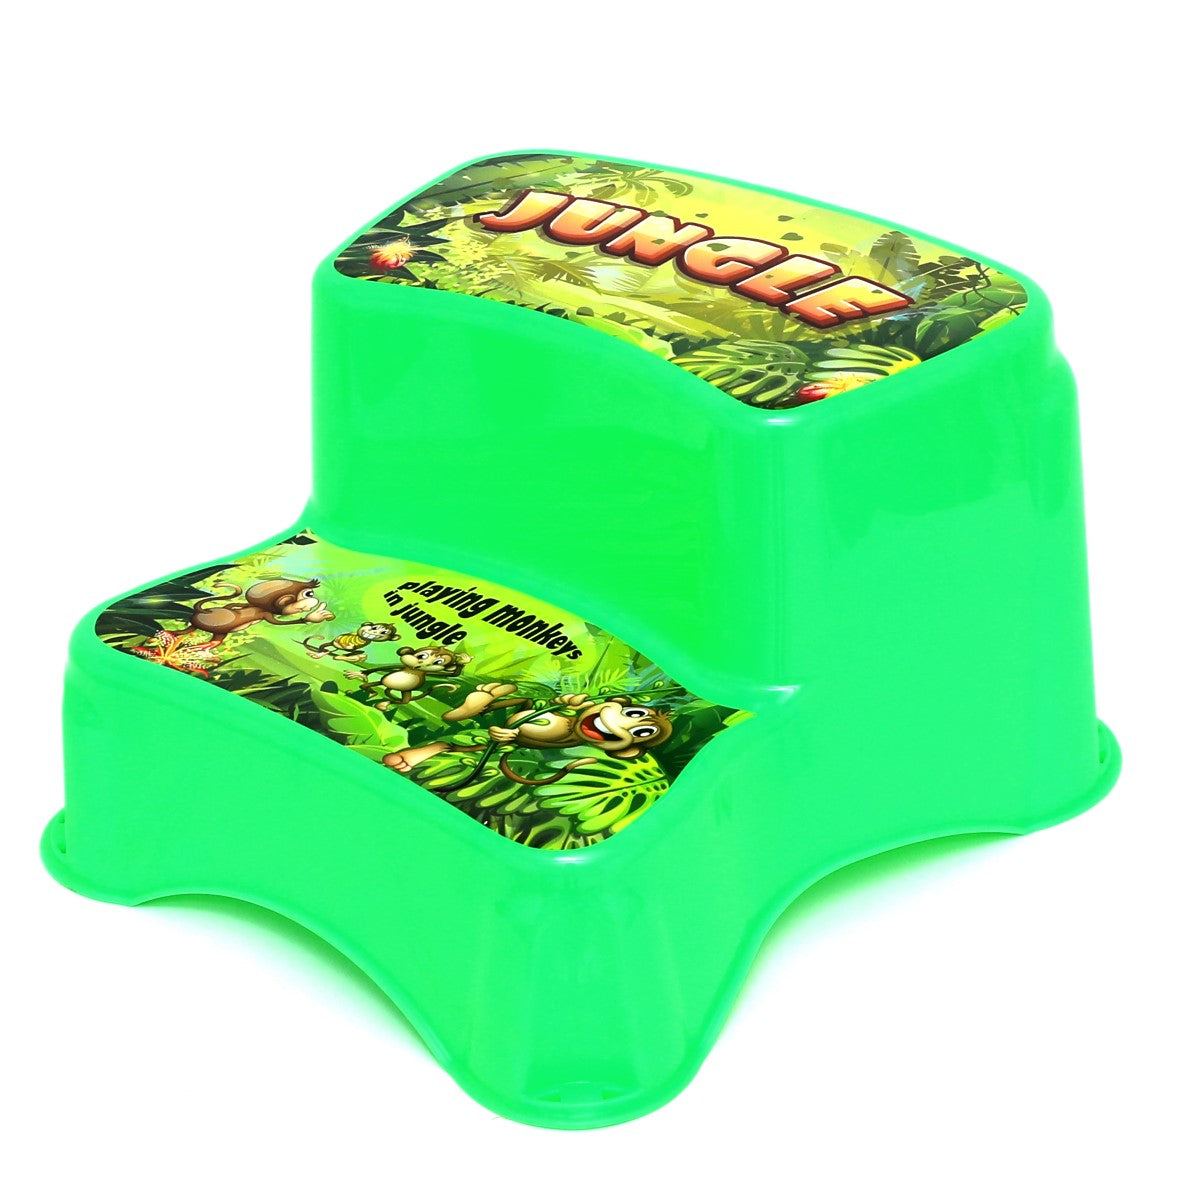 Two Step Stool Green.TP506